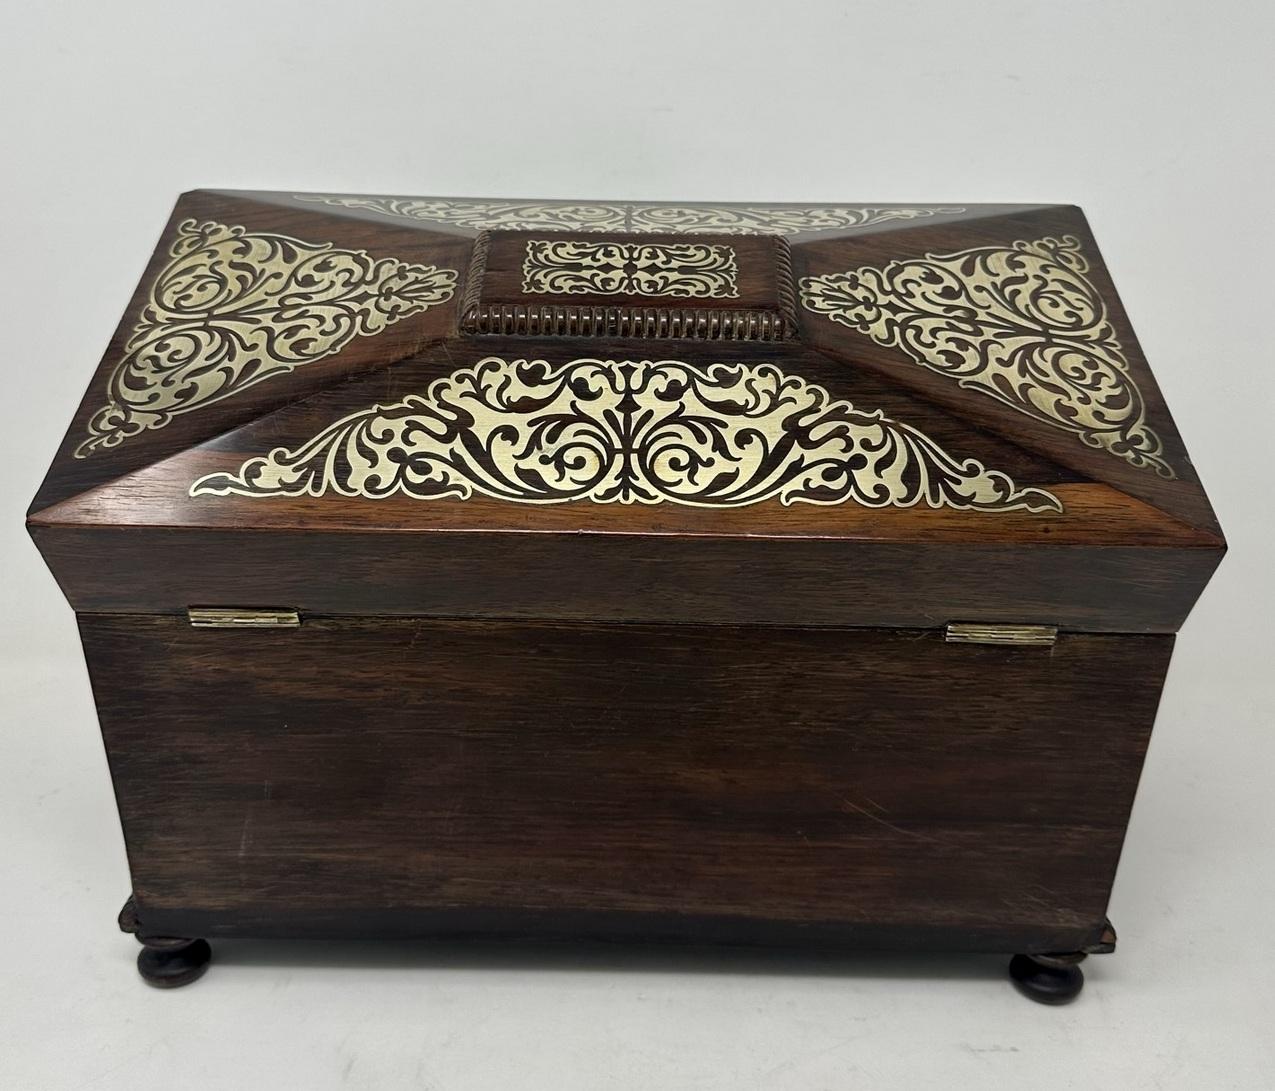 Antique Brass Inlaid Mahogany English Tea Caddy Box Regency Gillows Lancaster For Sale 1